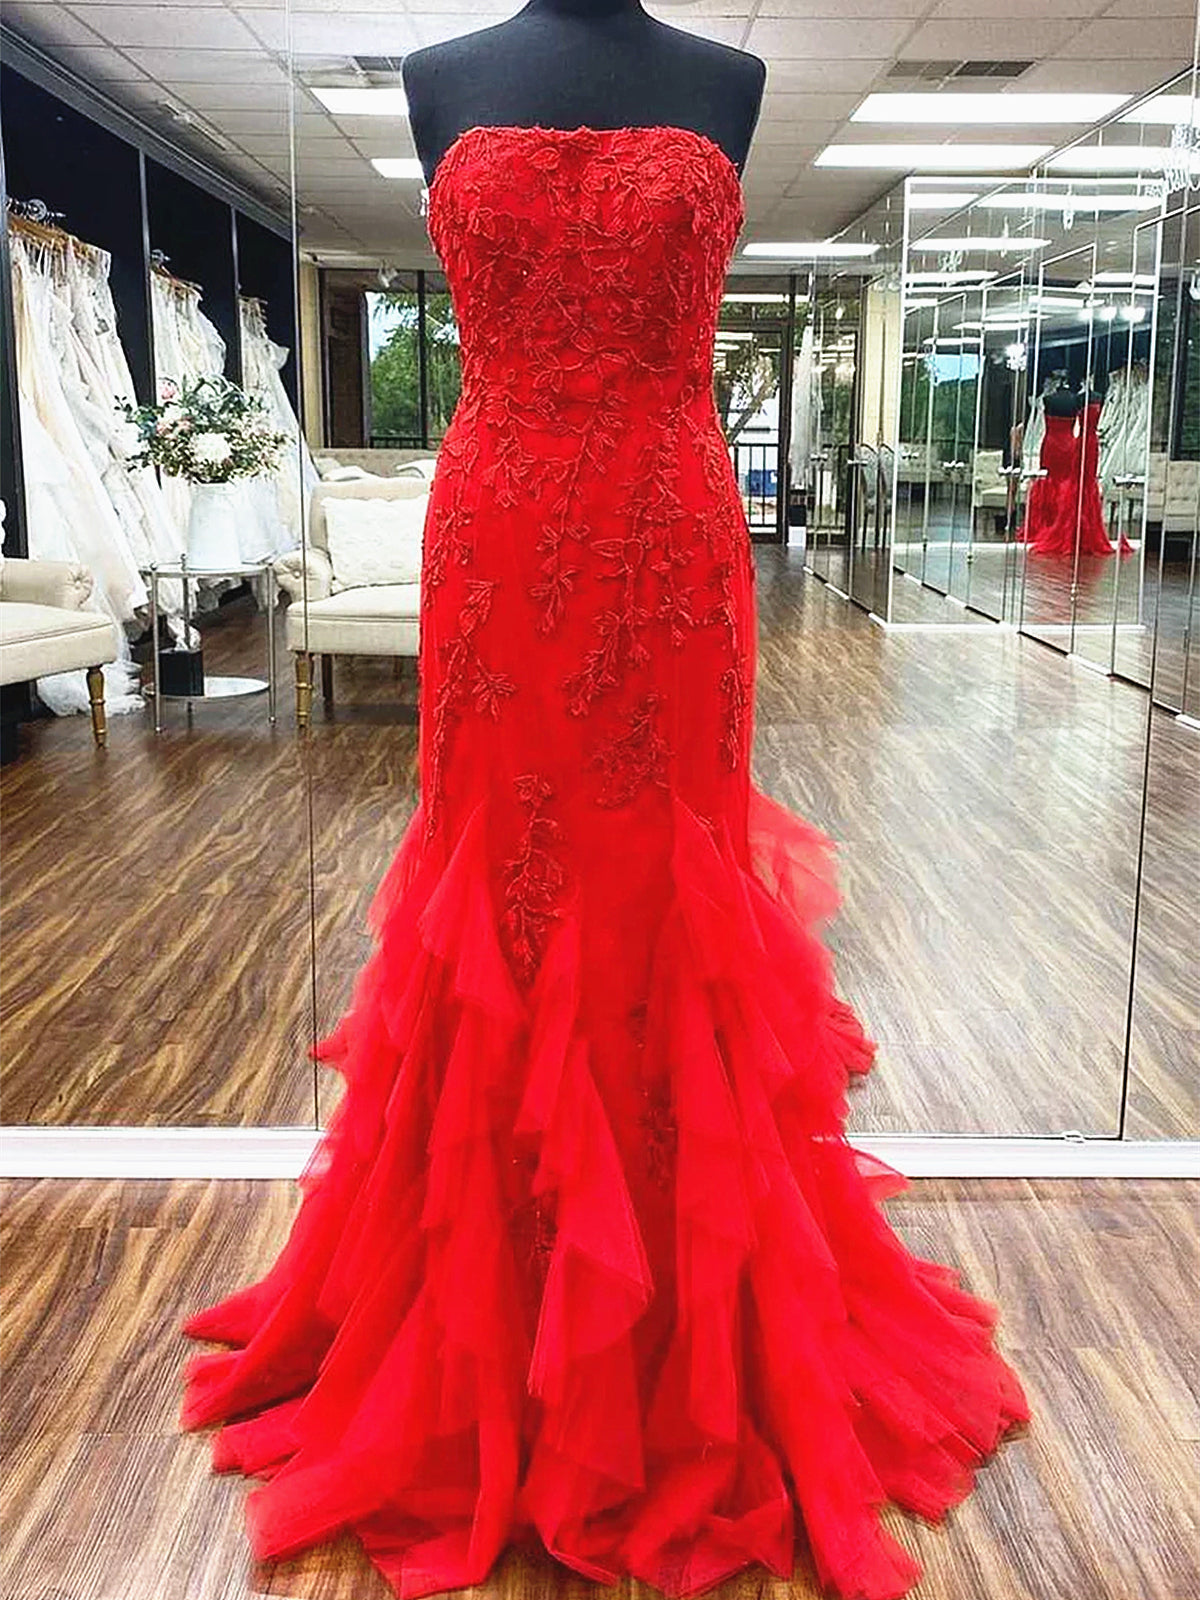 Red Tulle Ruffle Lace Mermaid Corset Prom Dresses, Red Lace Ruffle Mermaid Long Corset Formal Evening Dresses outfit, Bridesmaid Dress Pink